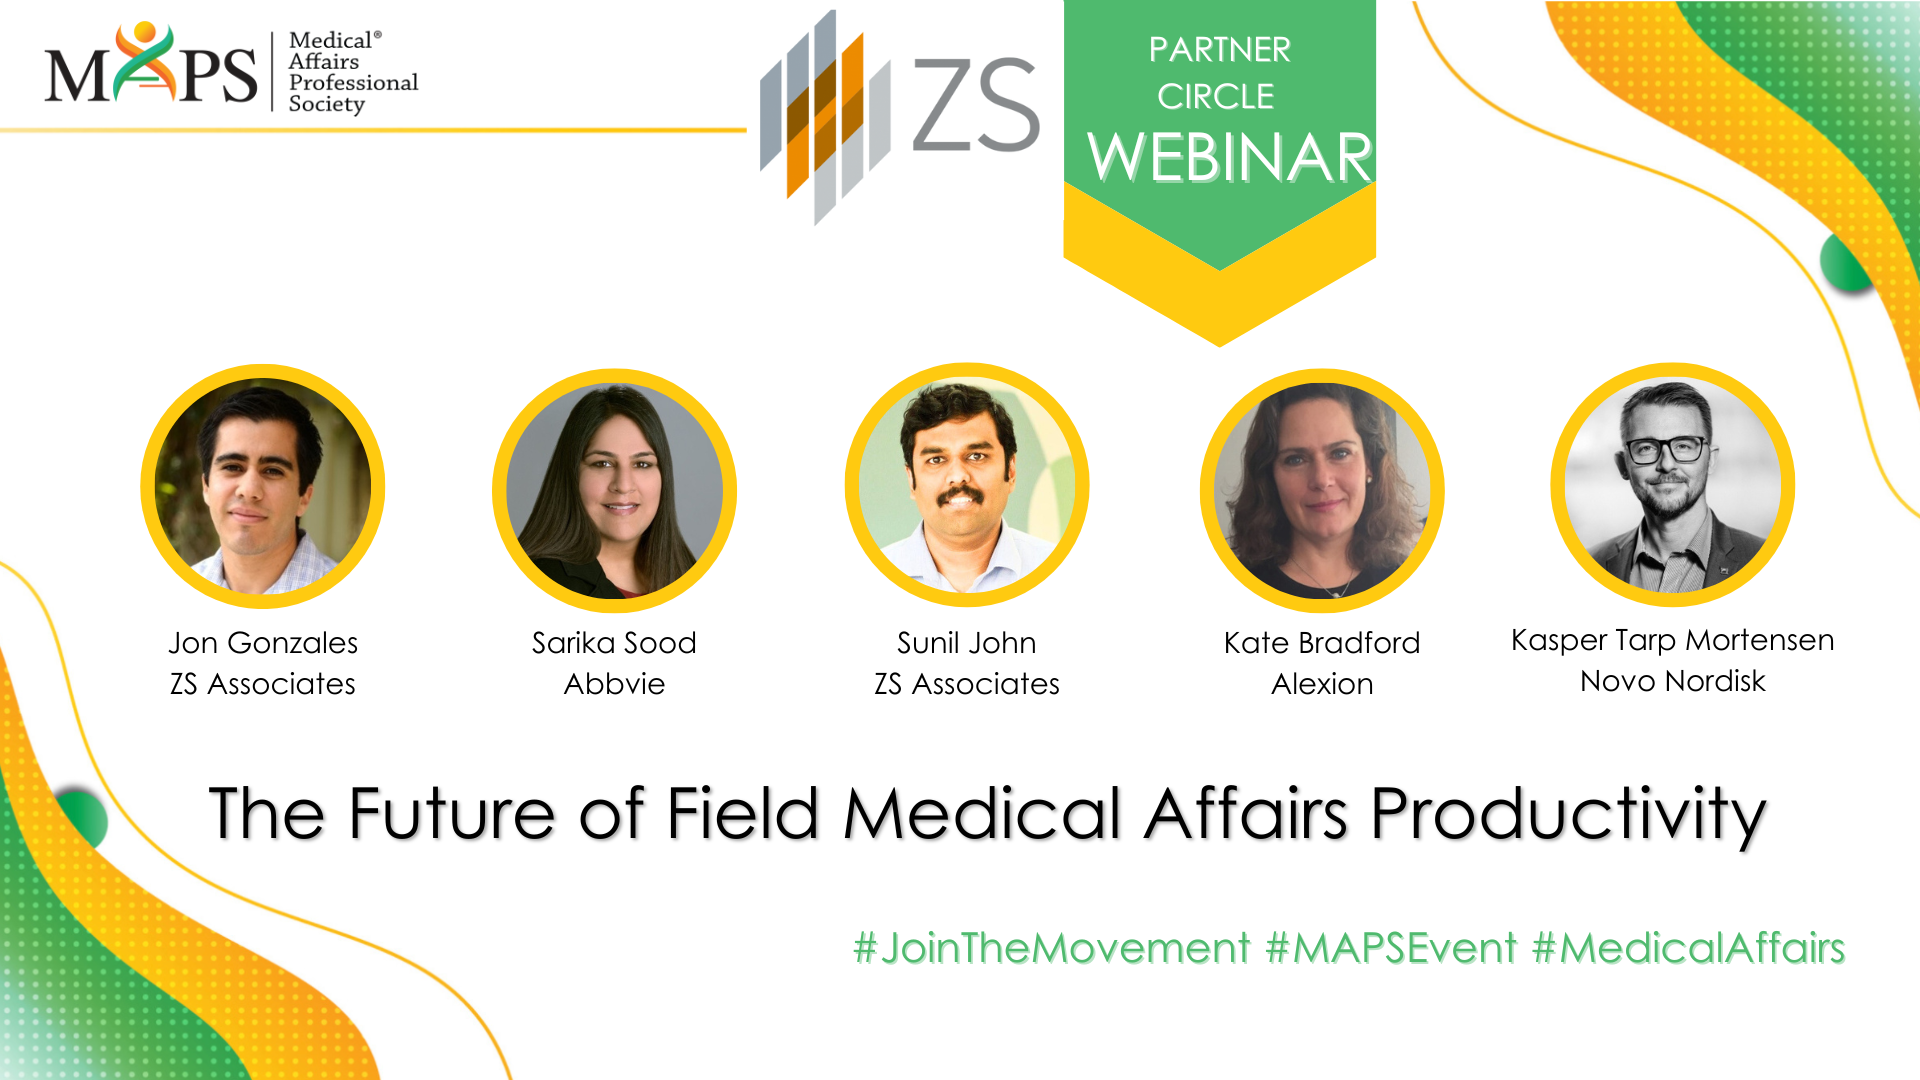 The Future of Field Medical Affairs Productivity